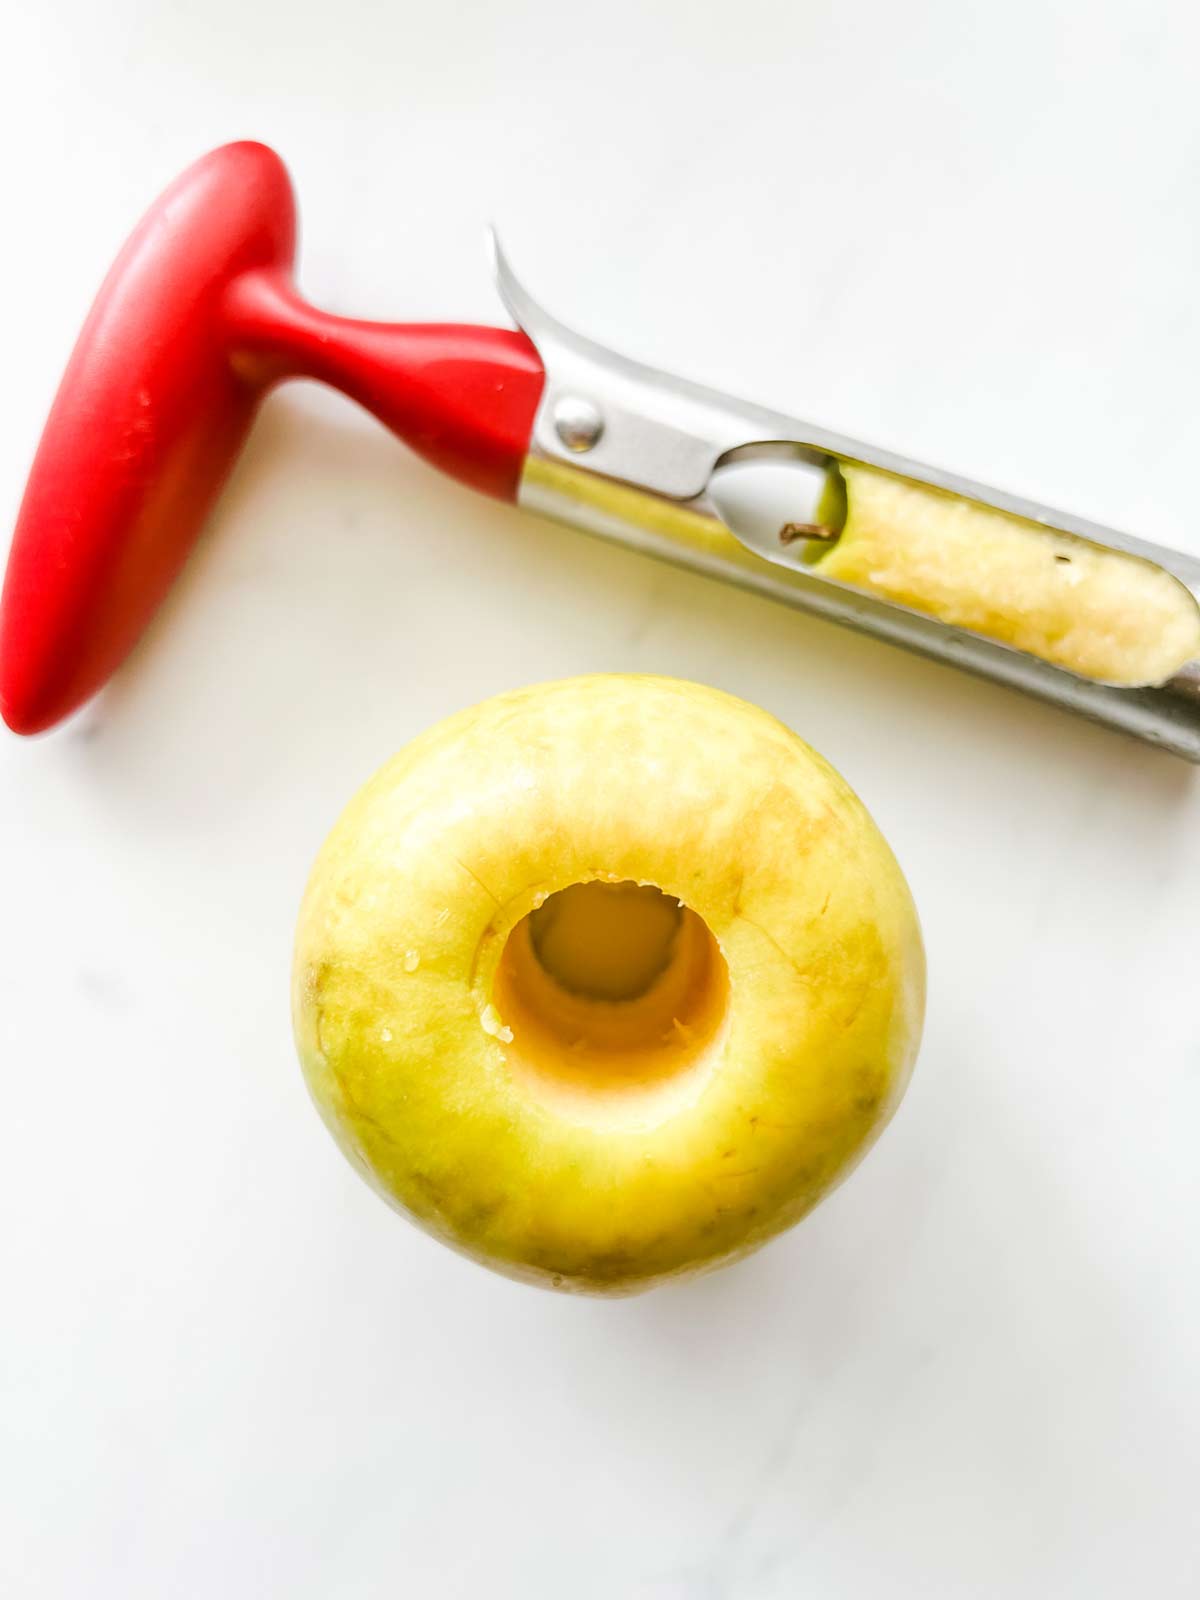 Photo of a cored apple with an apple corer sitting next to it.